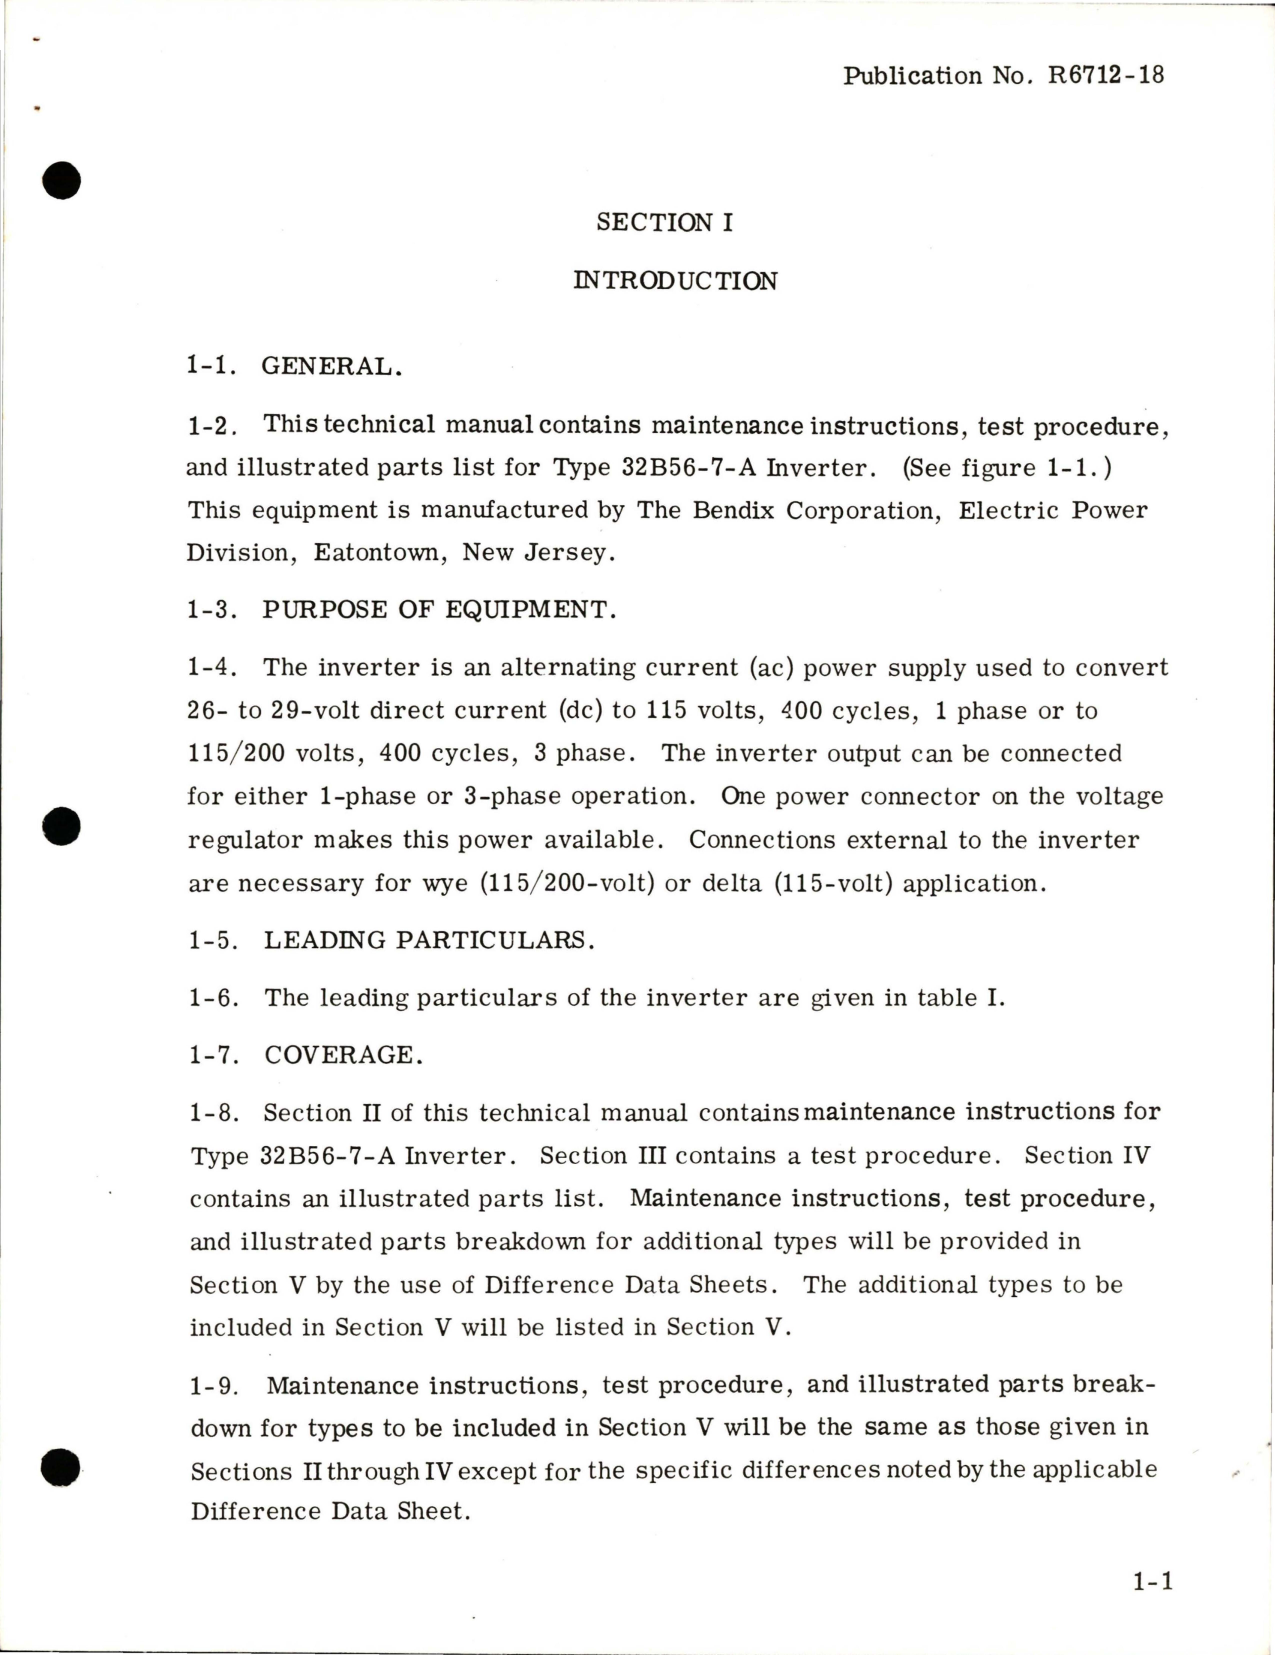 Sample page 9 from AirCorps Library document: Maintenance Instructions with Illustrated Parts List for Inverter - Type 32B56-7-A and 32B56-11-A